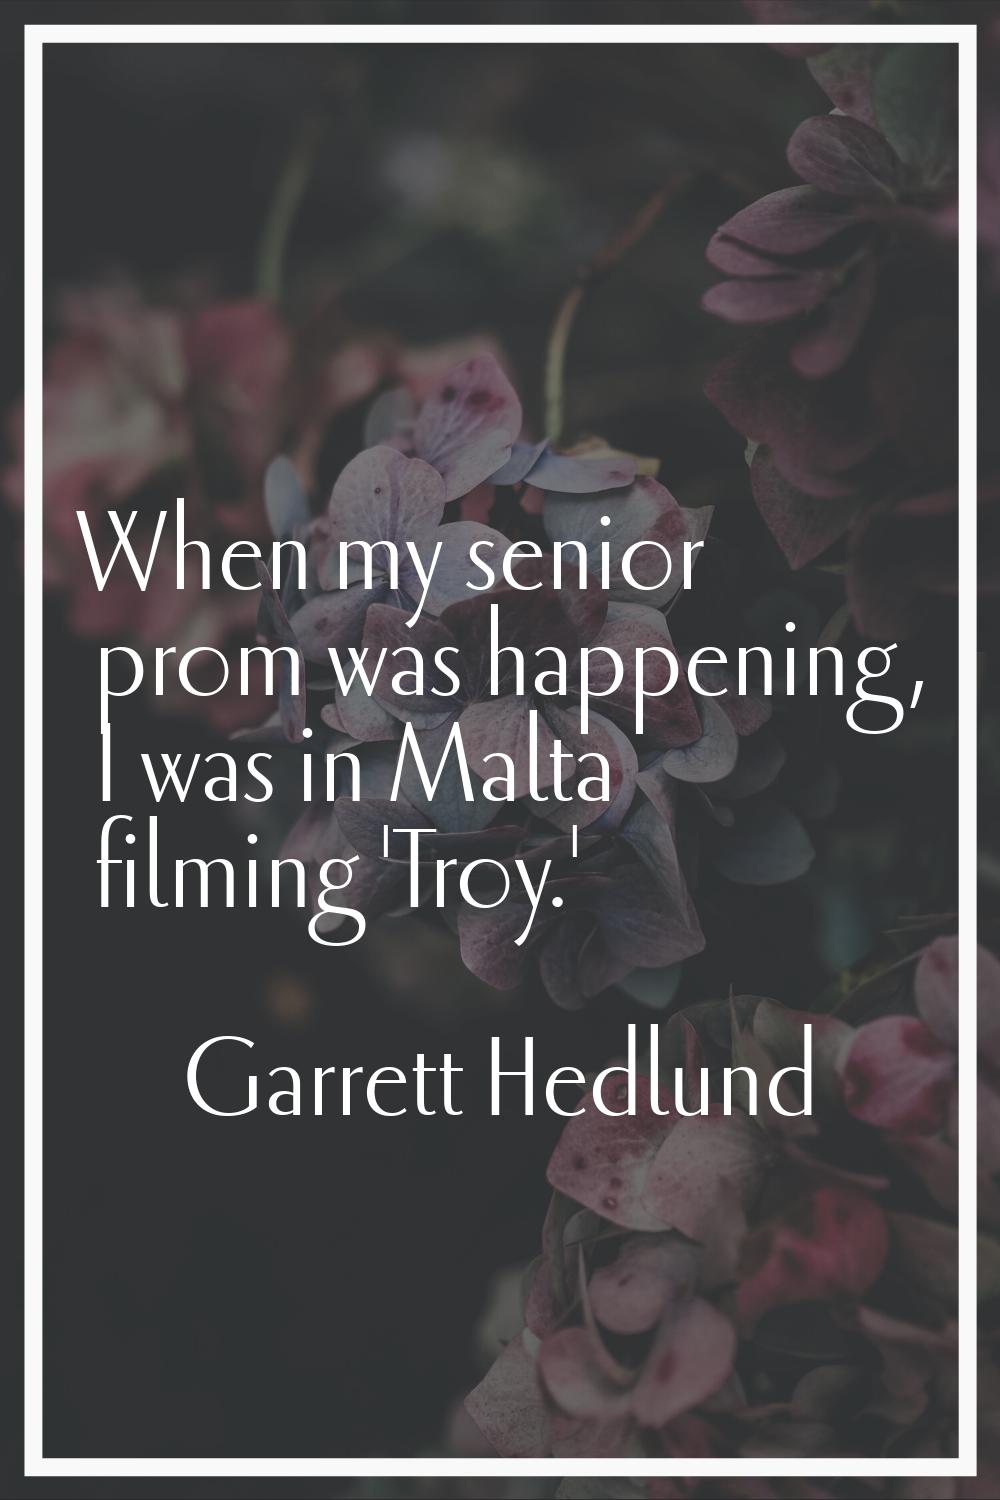 When my senior prom was happening, I was in Malta filming 'Troy.'